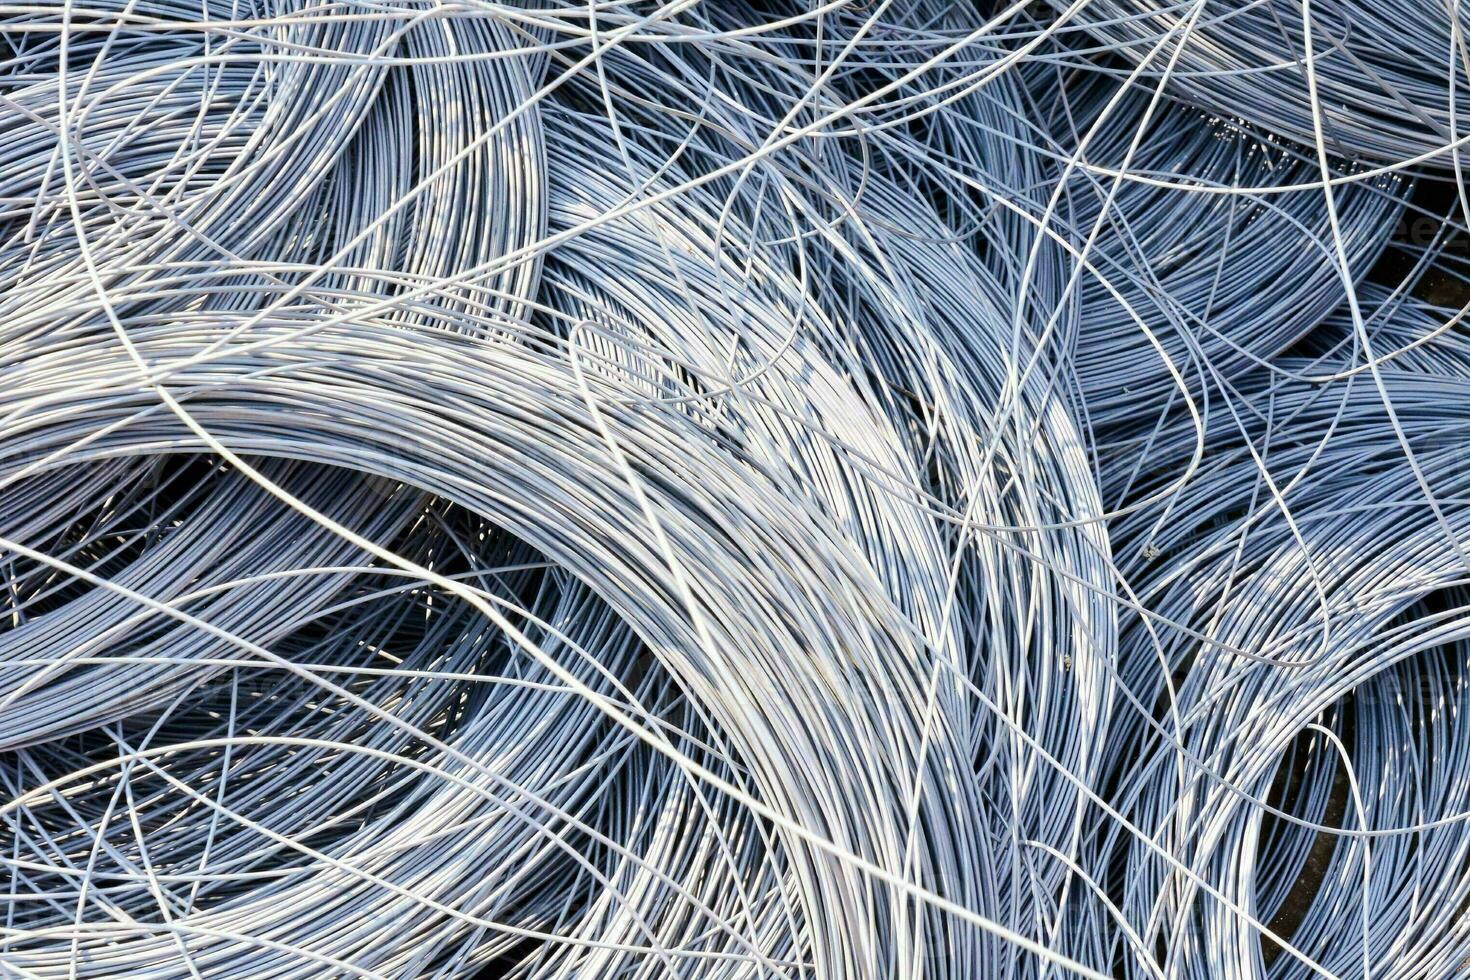 a pile of metal wire is shown in this photo